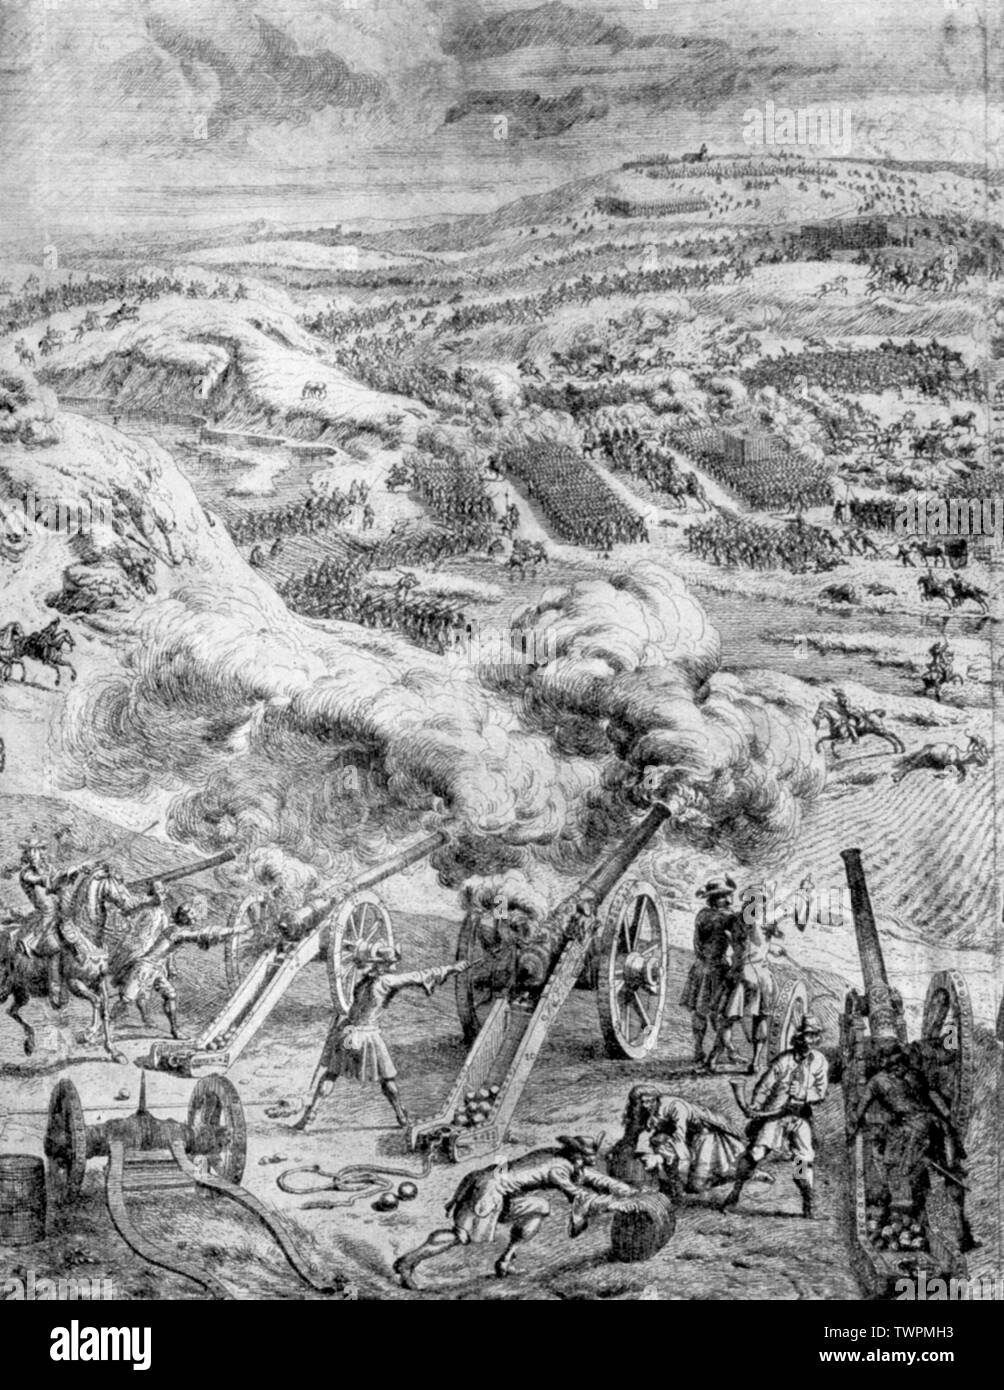 'Artillery of King William III in Action at the Boyne, 1st July 1690'. By Theodor Mass. The Battle of the Boyne was fought between the two rival claimants of the English, Scottish, and Irish thrones; the Catholic King James II (1633-1701) and the Protestant King William III (1650-1702). The battle took place across the River Boyne near Drogheda on the east coast of Ireland and was won by King William III. Stock Photo